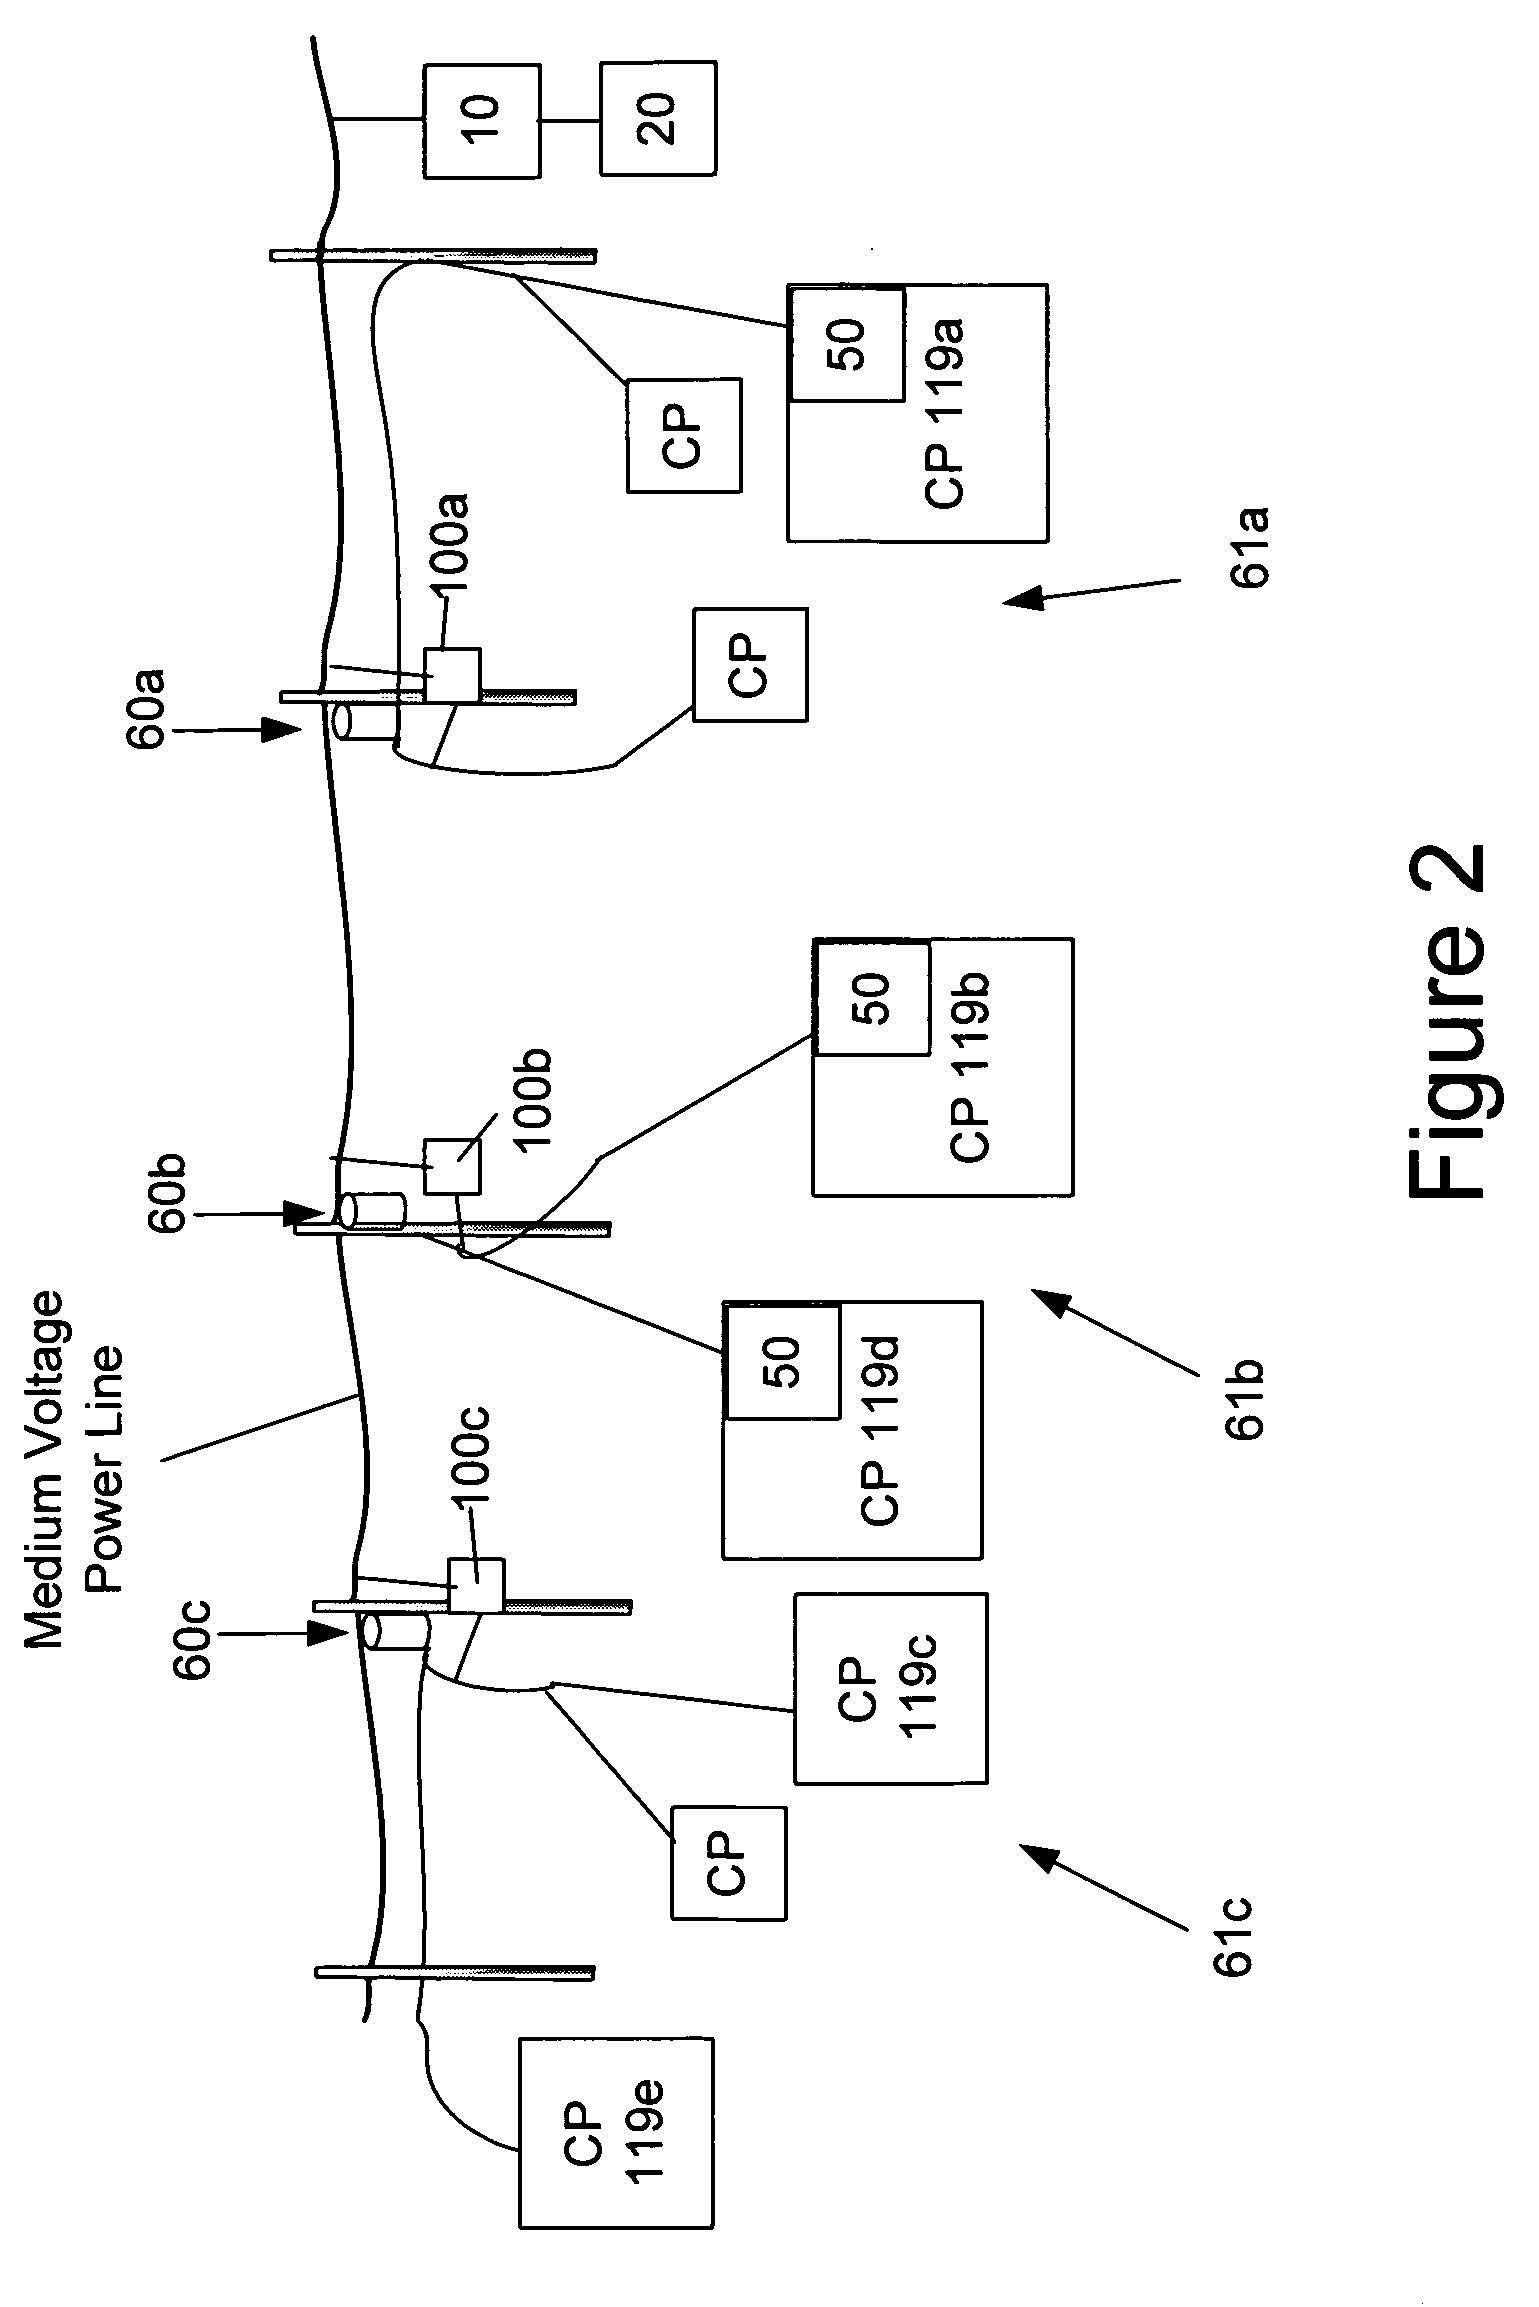 System and method for detecting noise source in a power line communications system